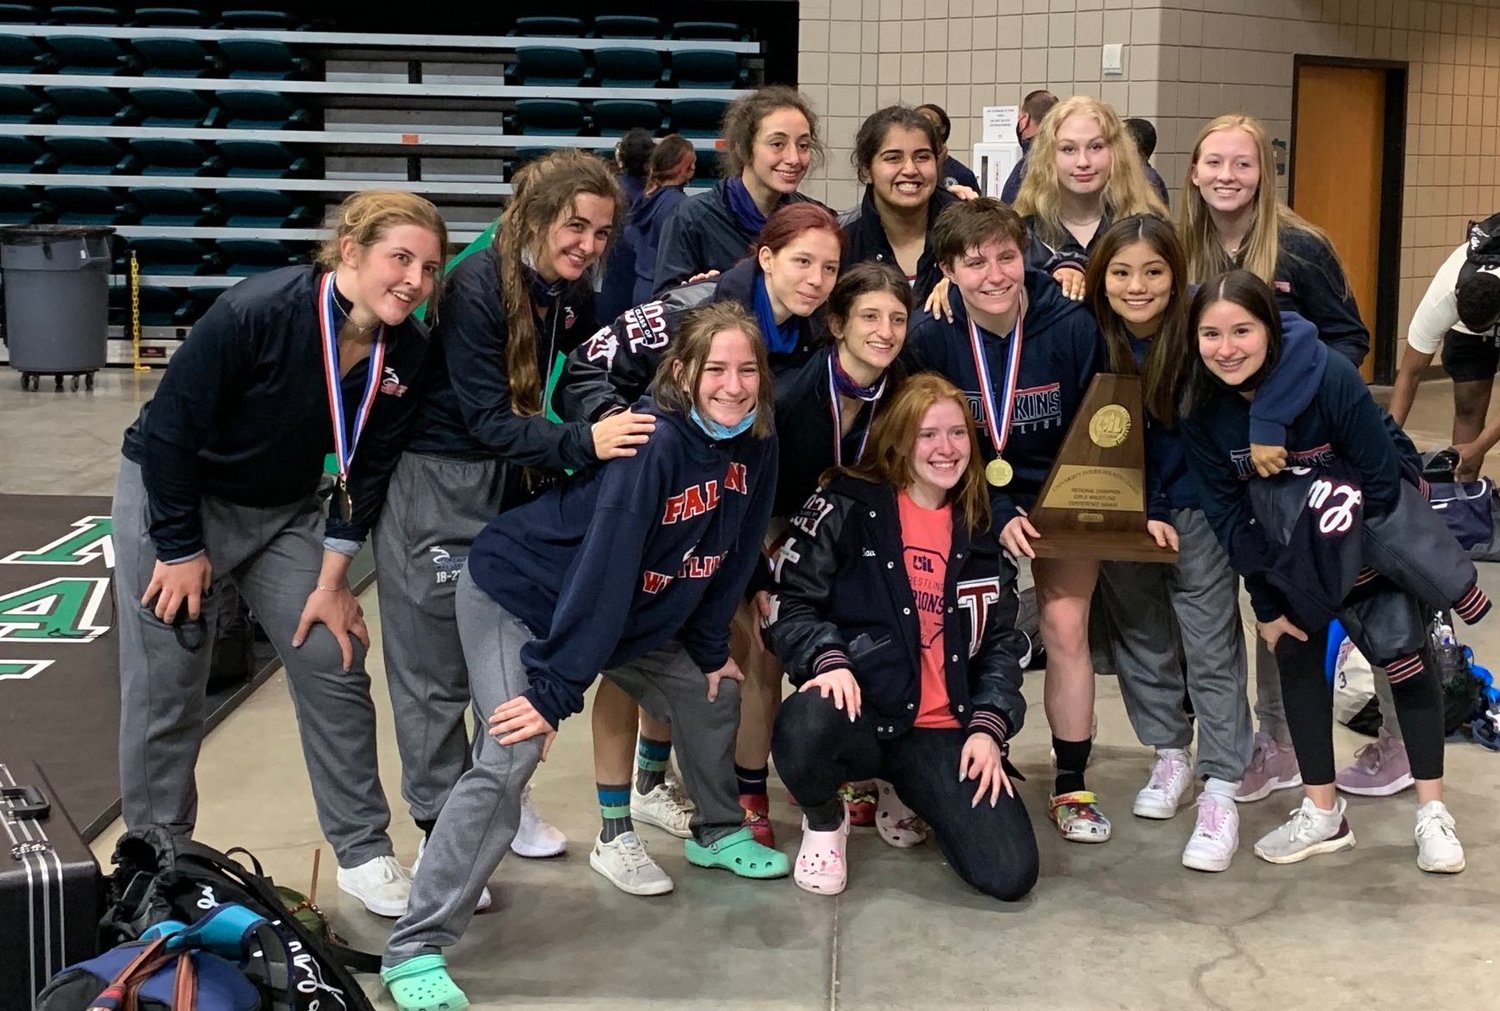 The Tompkins girls won their second straight team regional wrestling title by scoring 145 points at the Class 6A Region III wrestling meet Saturday, April 17, at the Merrell Center. The Falcons had three regional champions. All are undefeated this season.